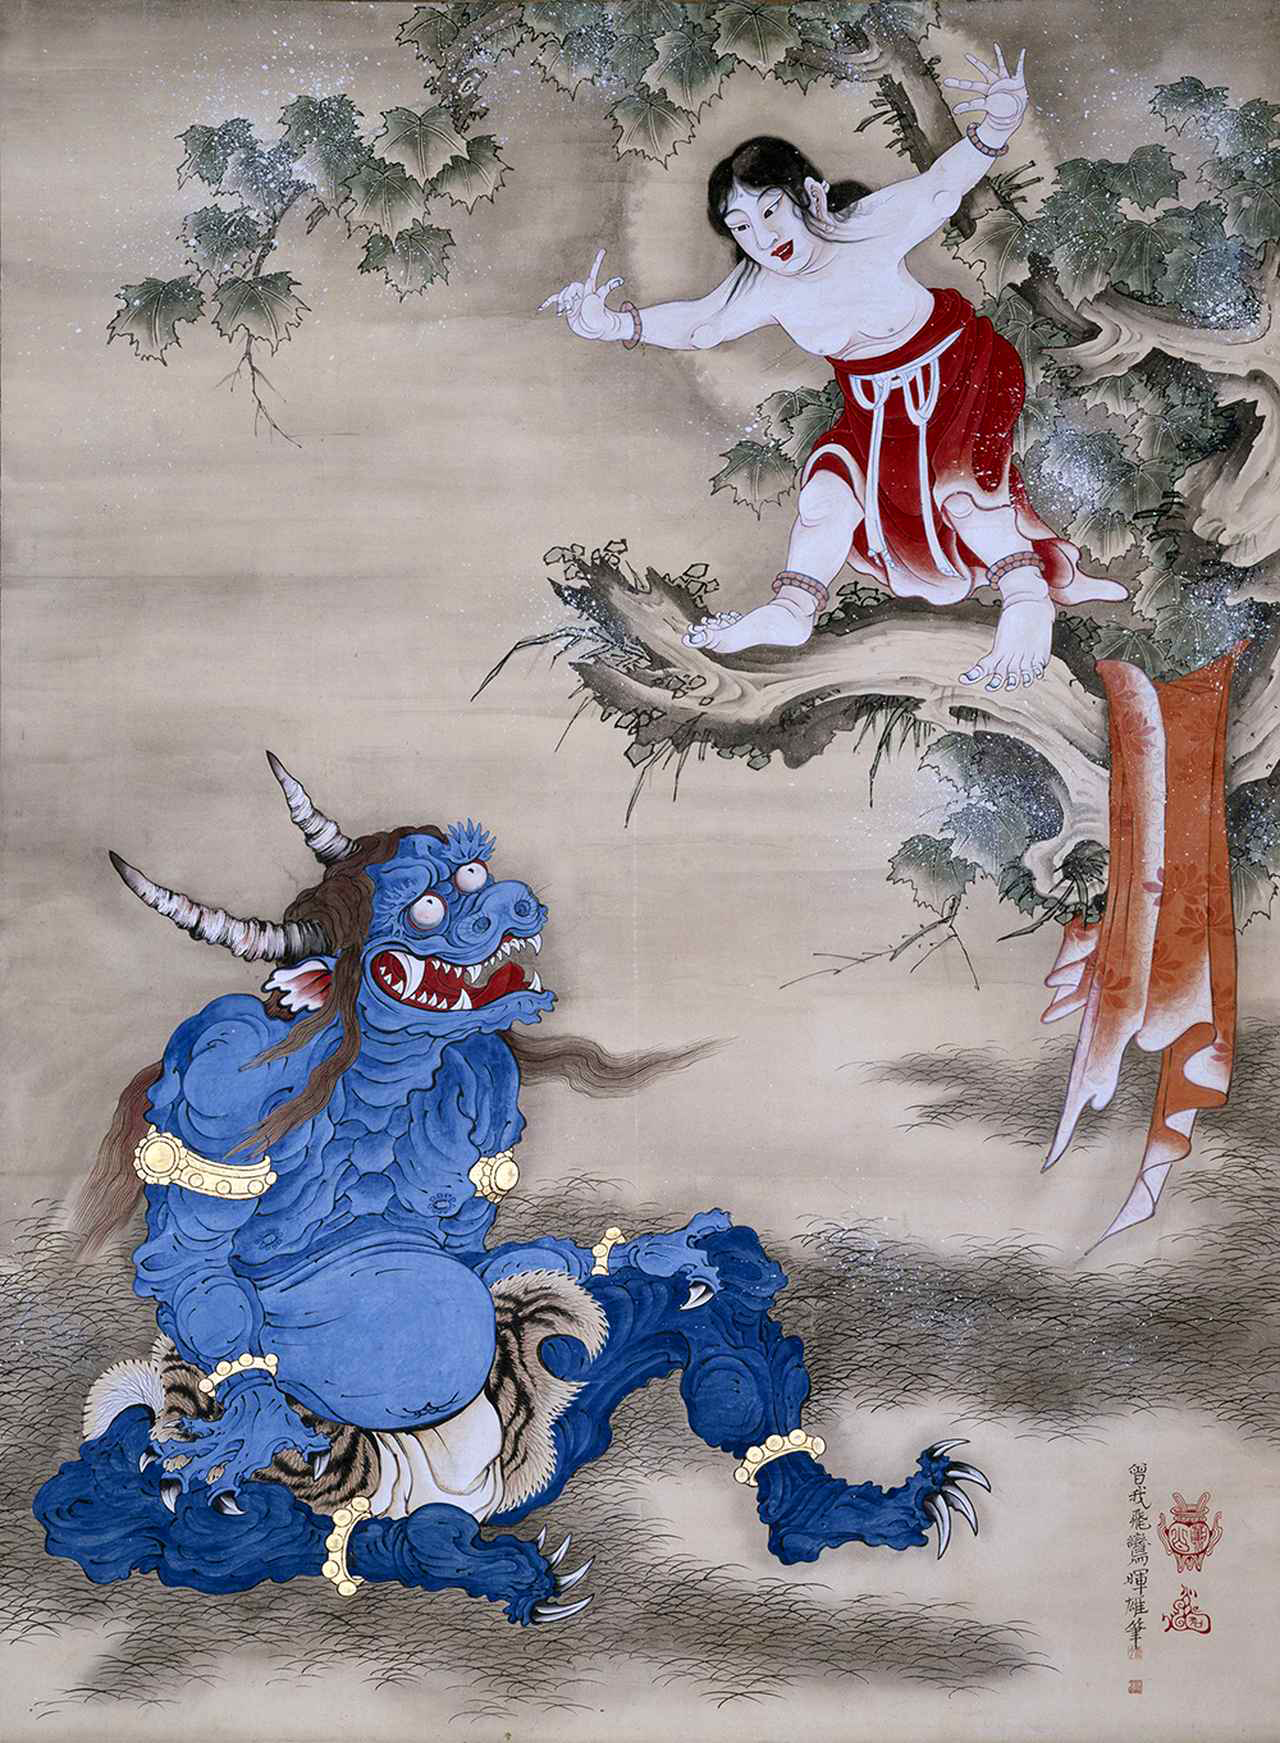 Sessen Doji Offering His Life to an Ogre (Japanese Oni), hanging scroll, color on paper, 1764